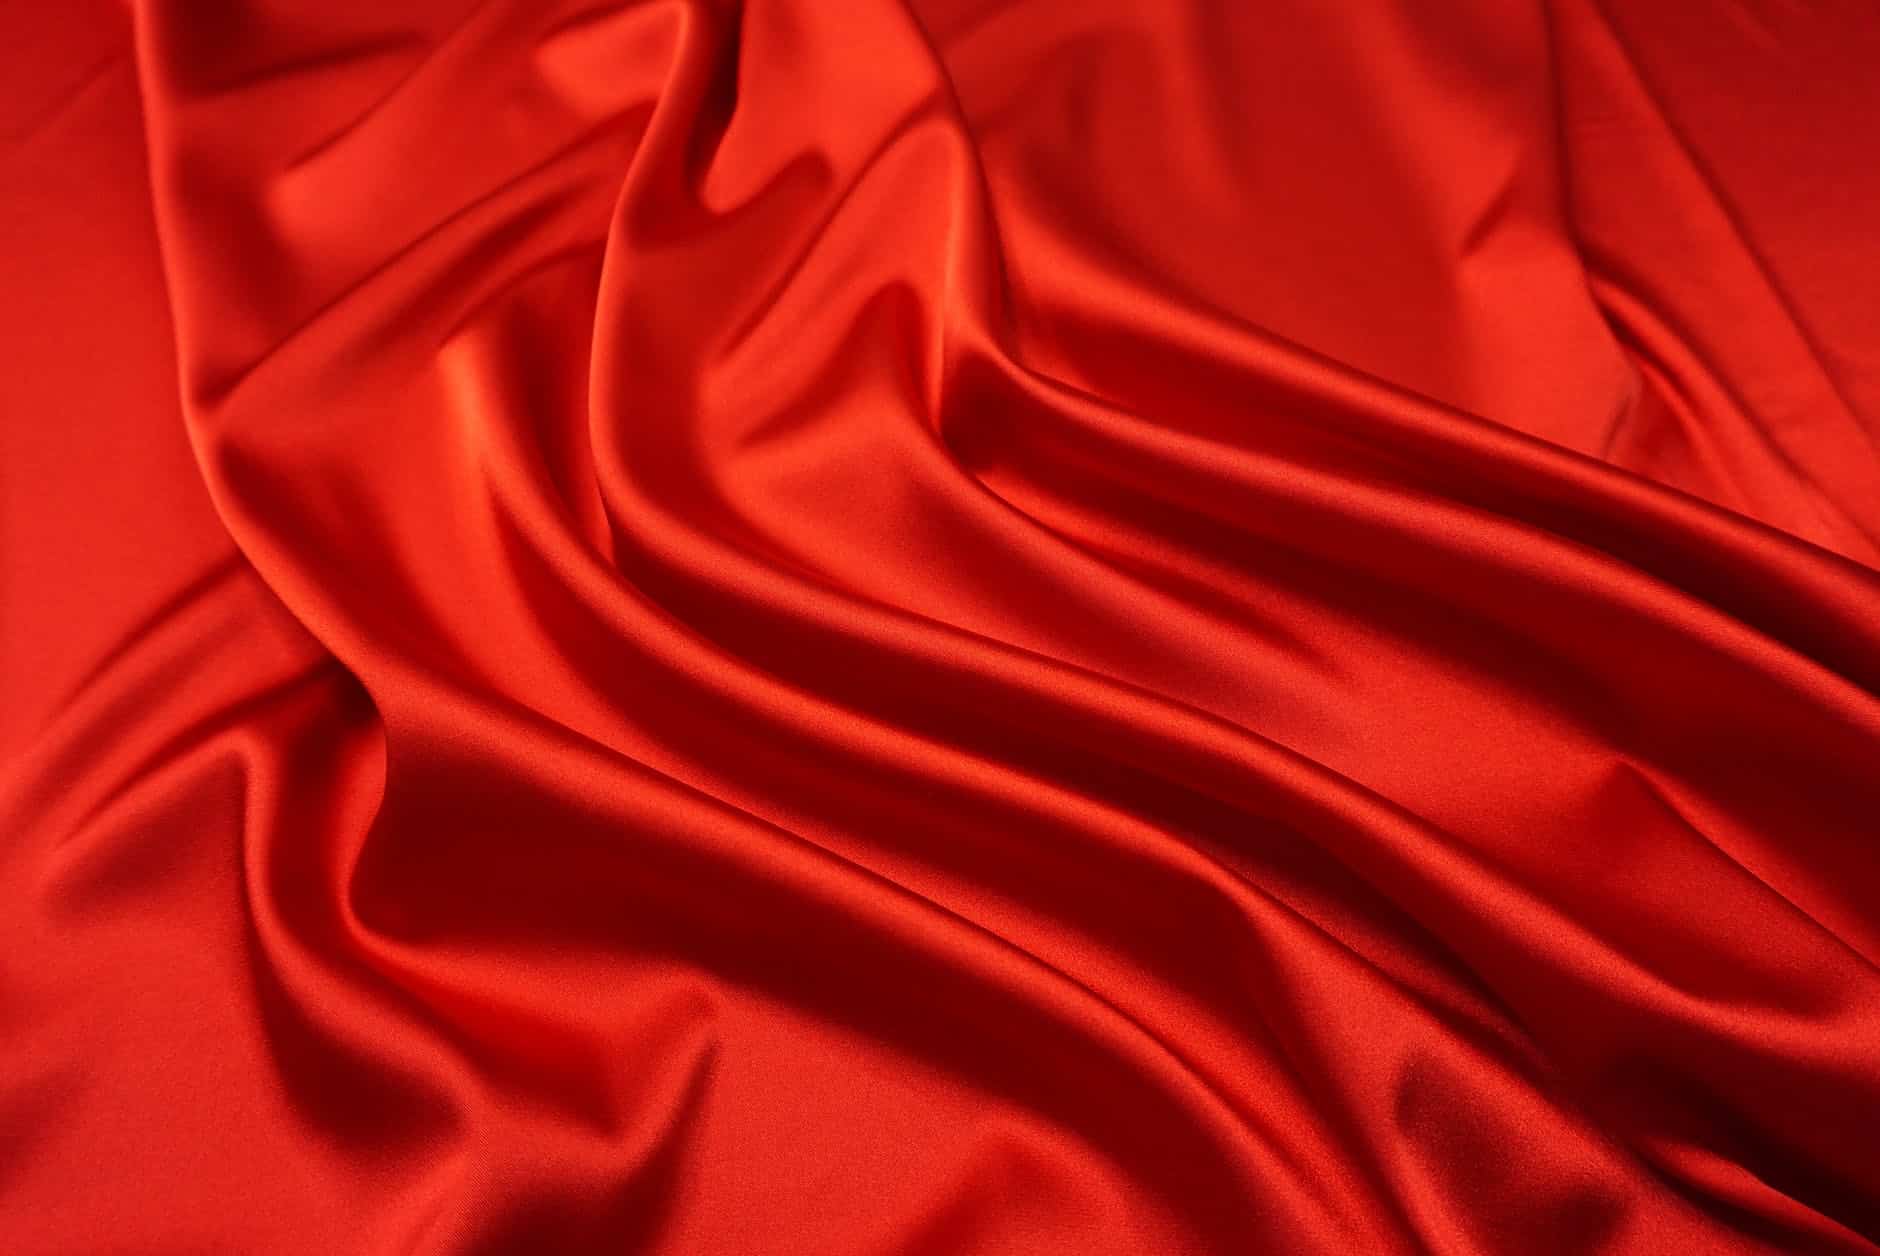 ripples on a red silk fabric